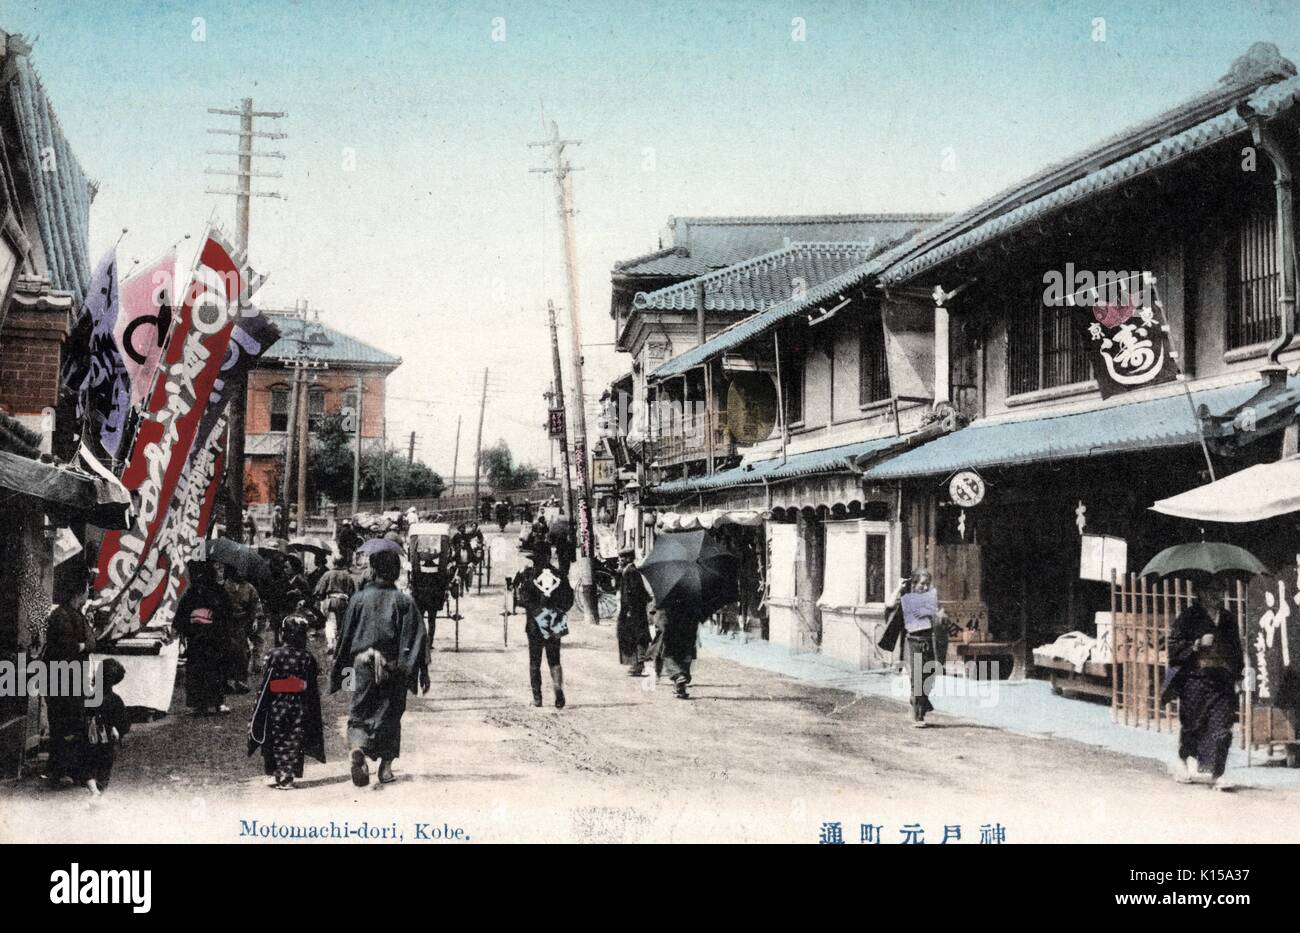 Hand colored post card of Motomachi-dori, showing people and carts on a road lined with stores, Kobe, Japan, 1912. From the New York Public Library. Stock Photo